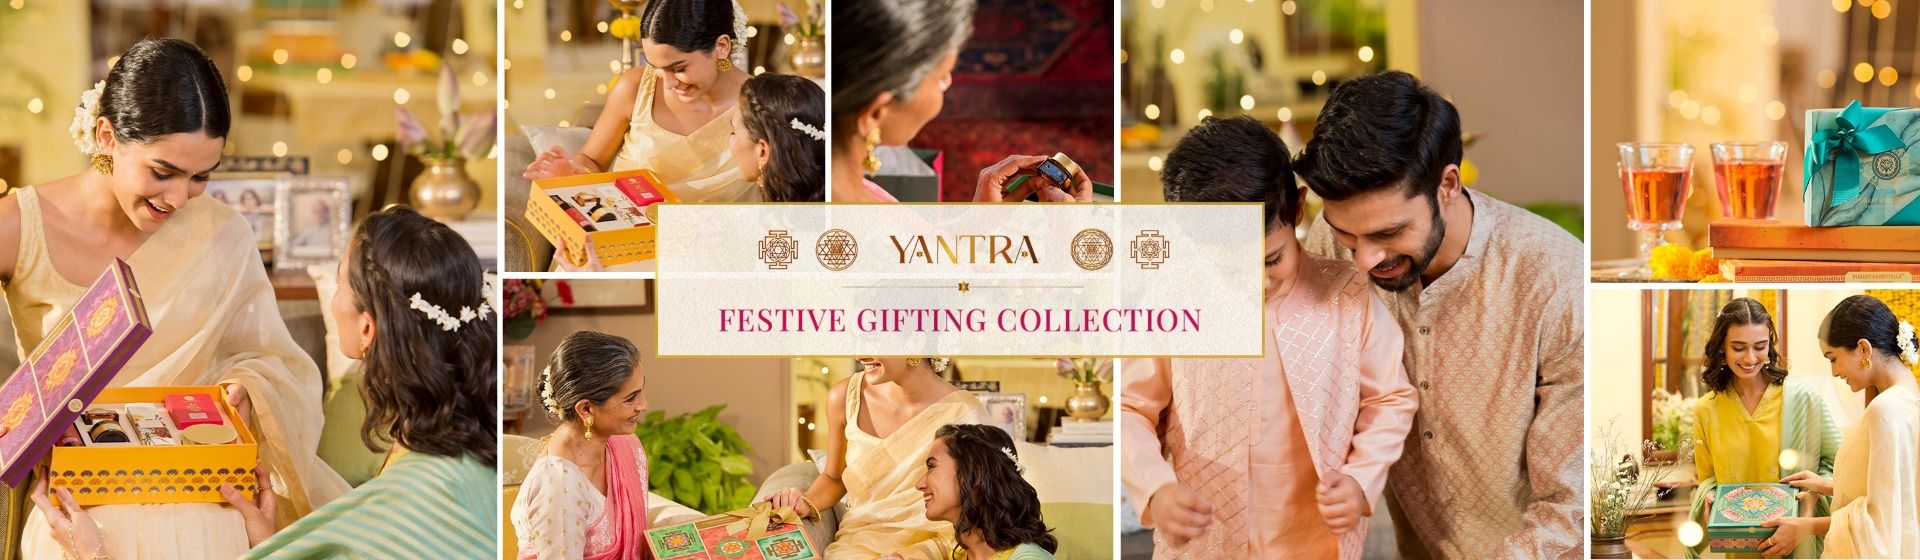 Yantra Gifting Collection